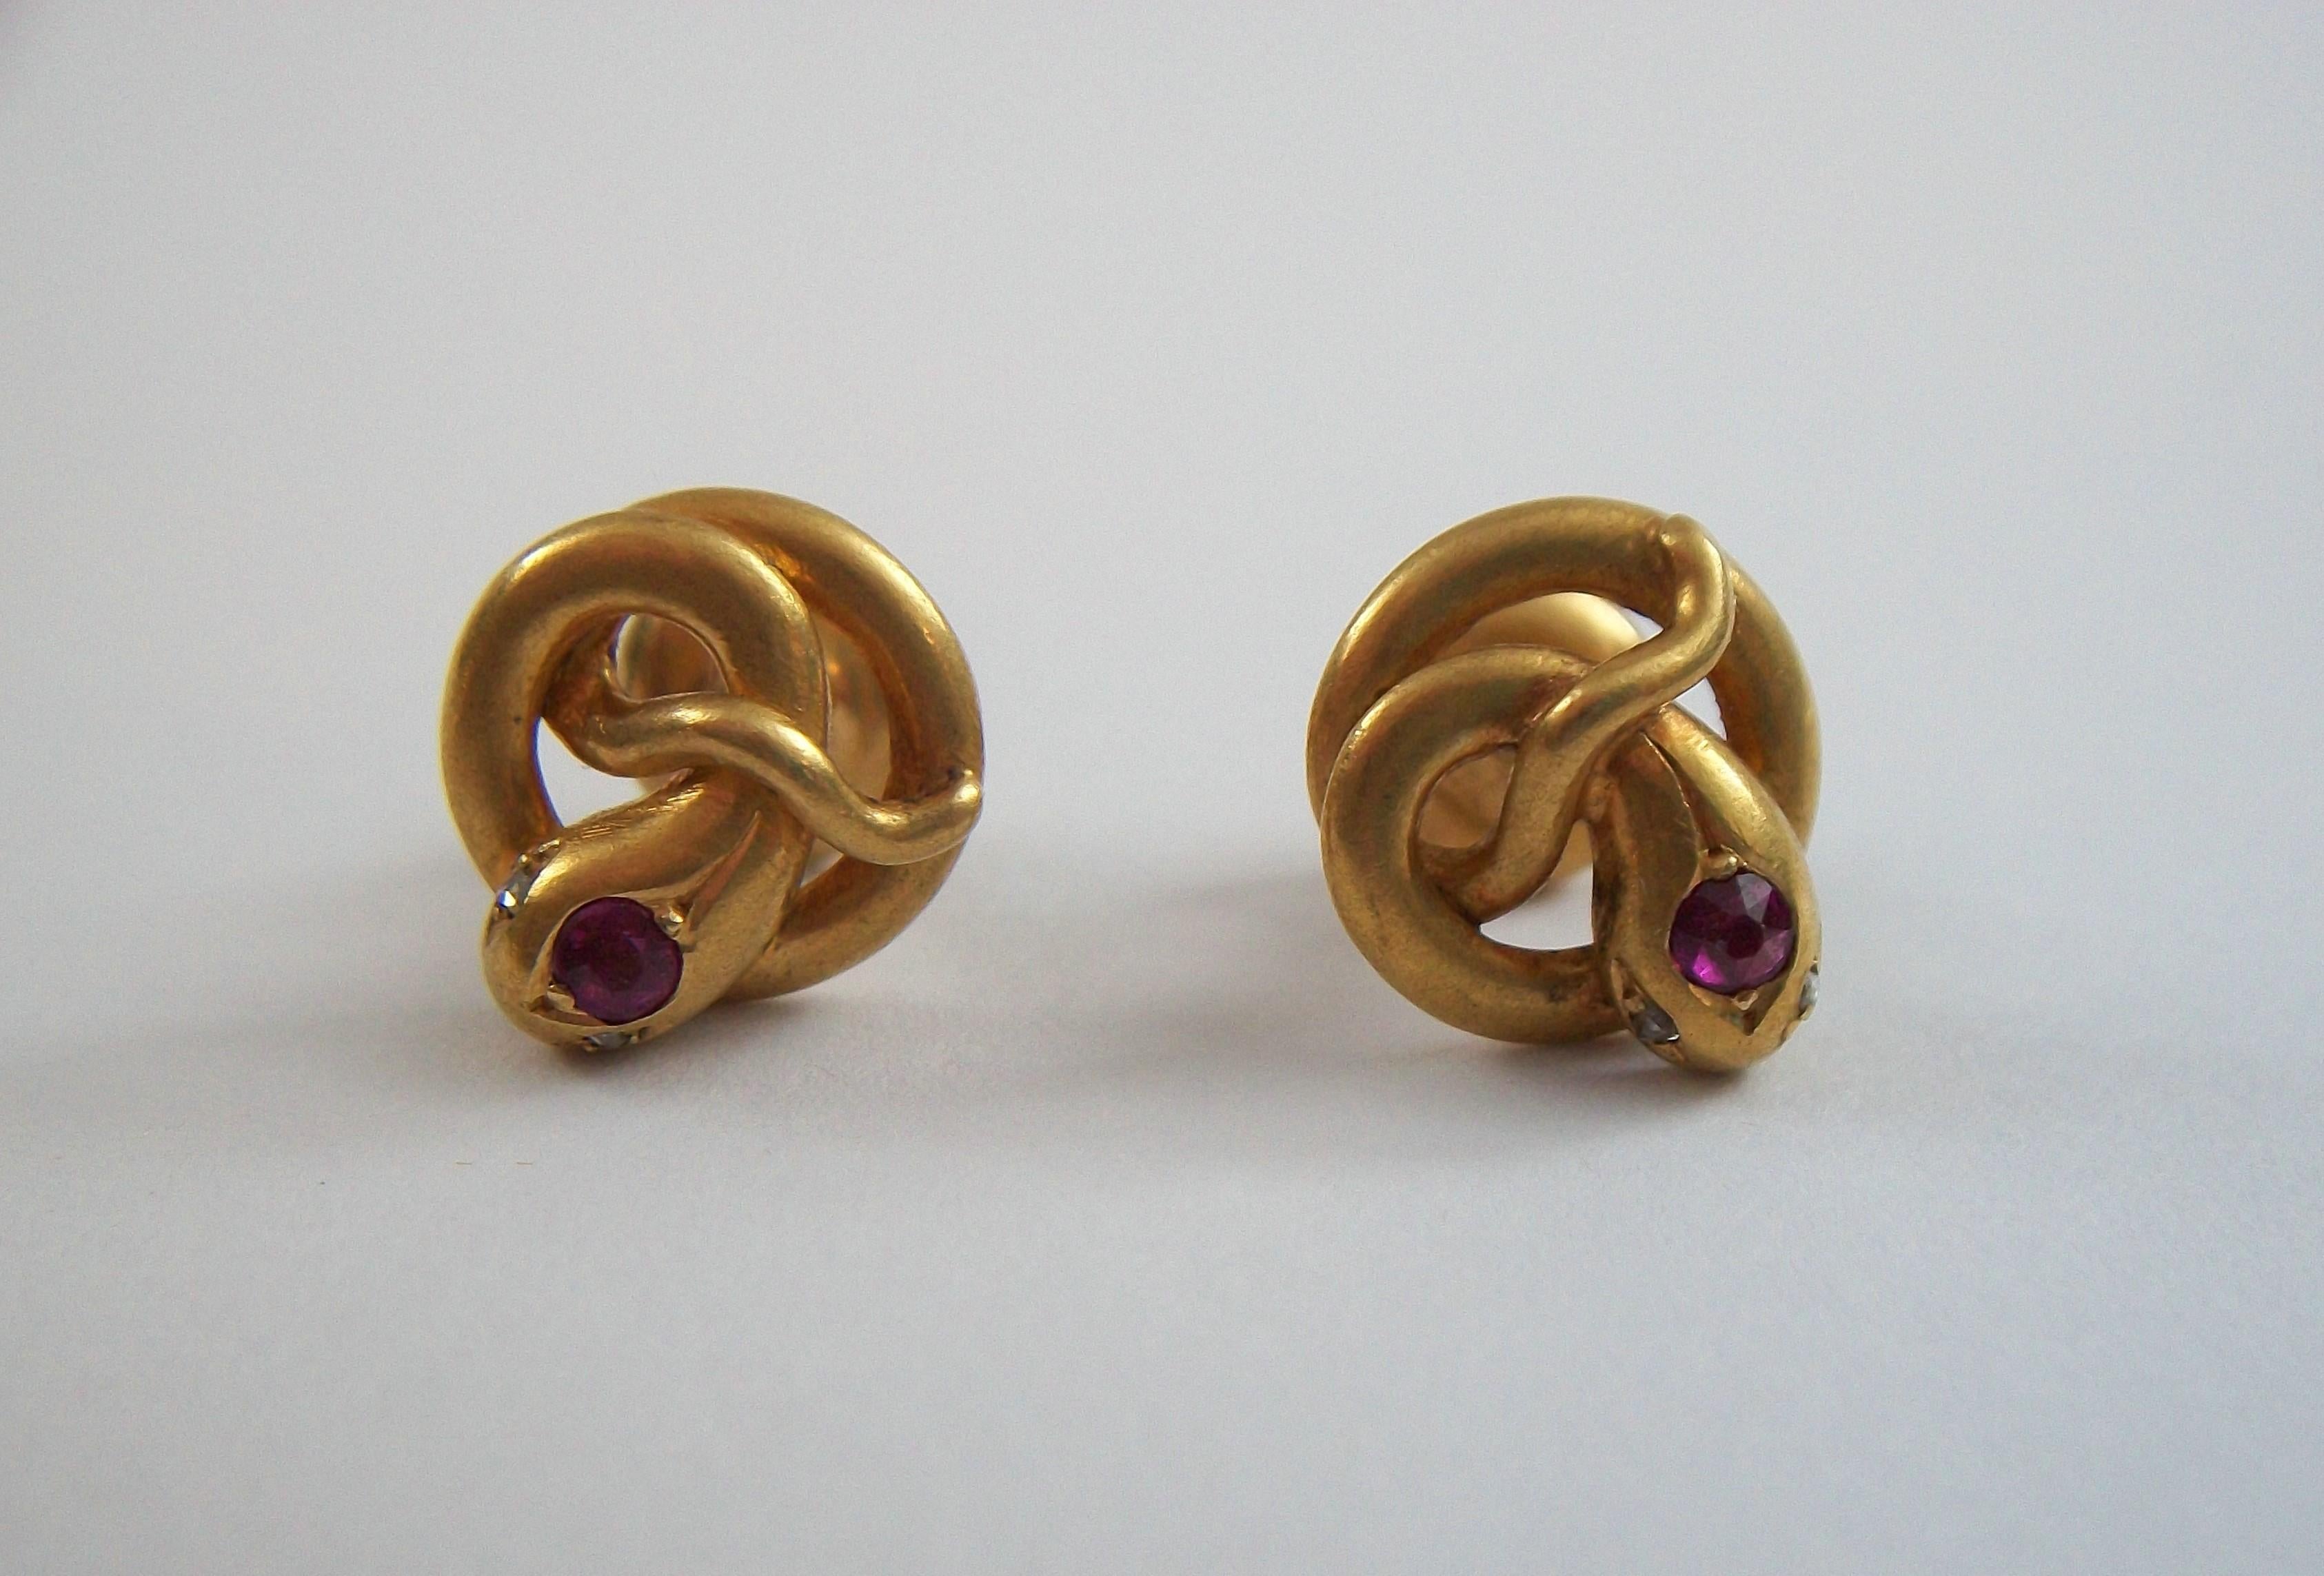 Round Cut Antique Pair of 18K Yellow Gold Snake Buttons - France - Late 19th Century For Sale